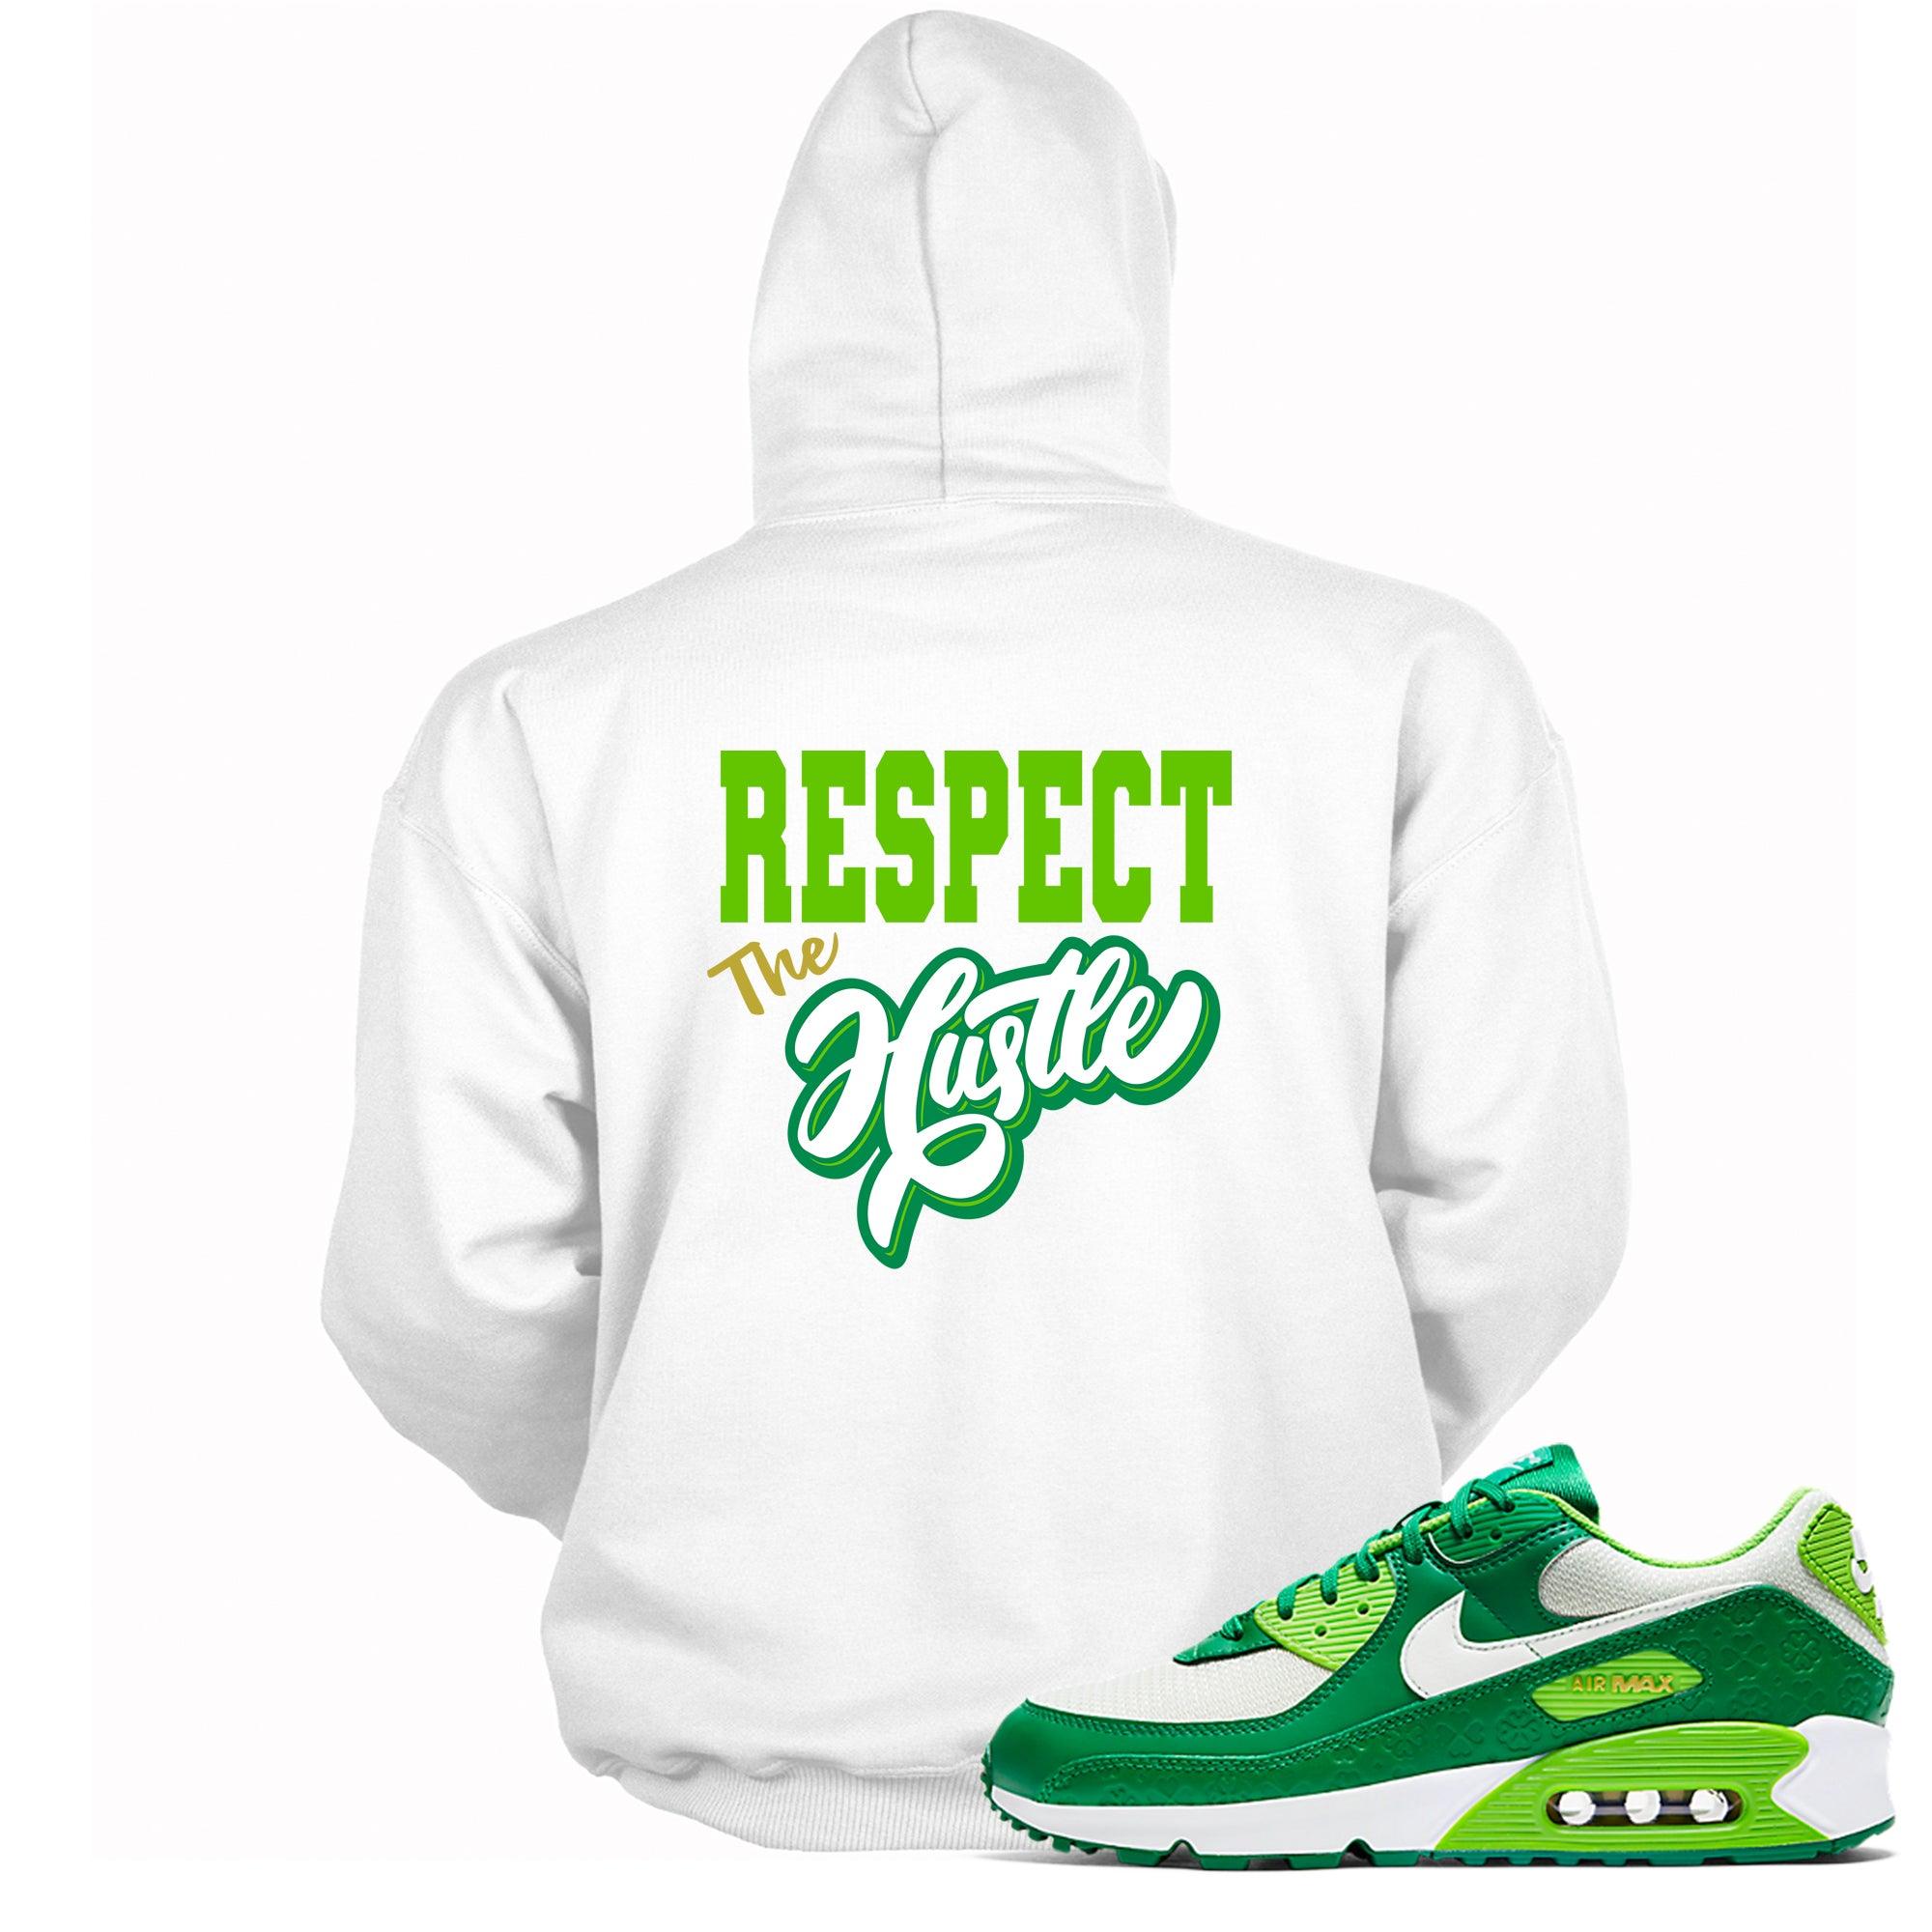 Respect The Hustle Hoodie Nike Air Max 90 St Patricks Day 2021 photo